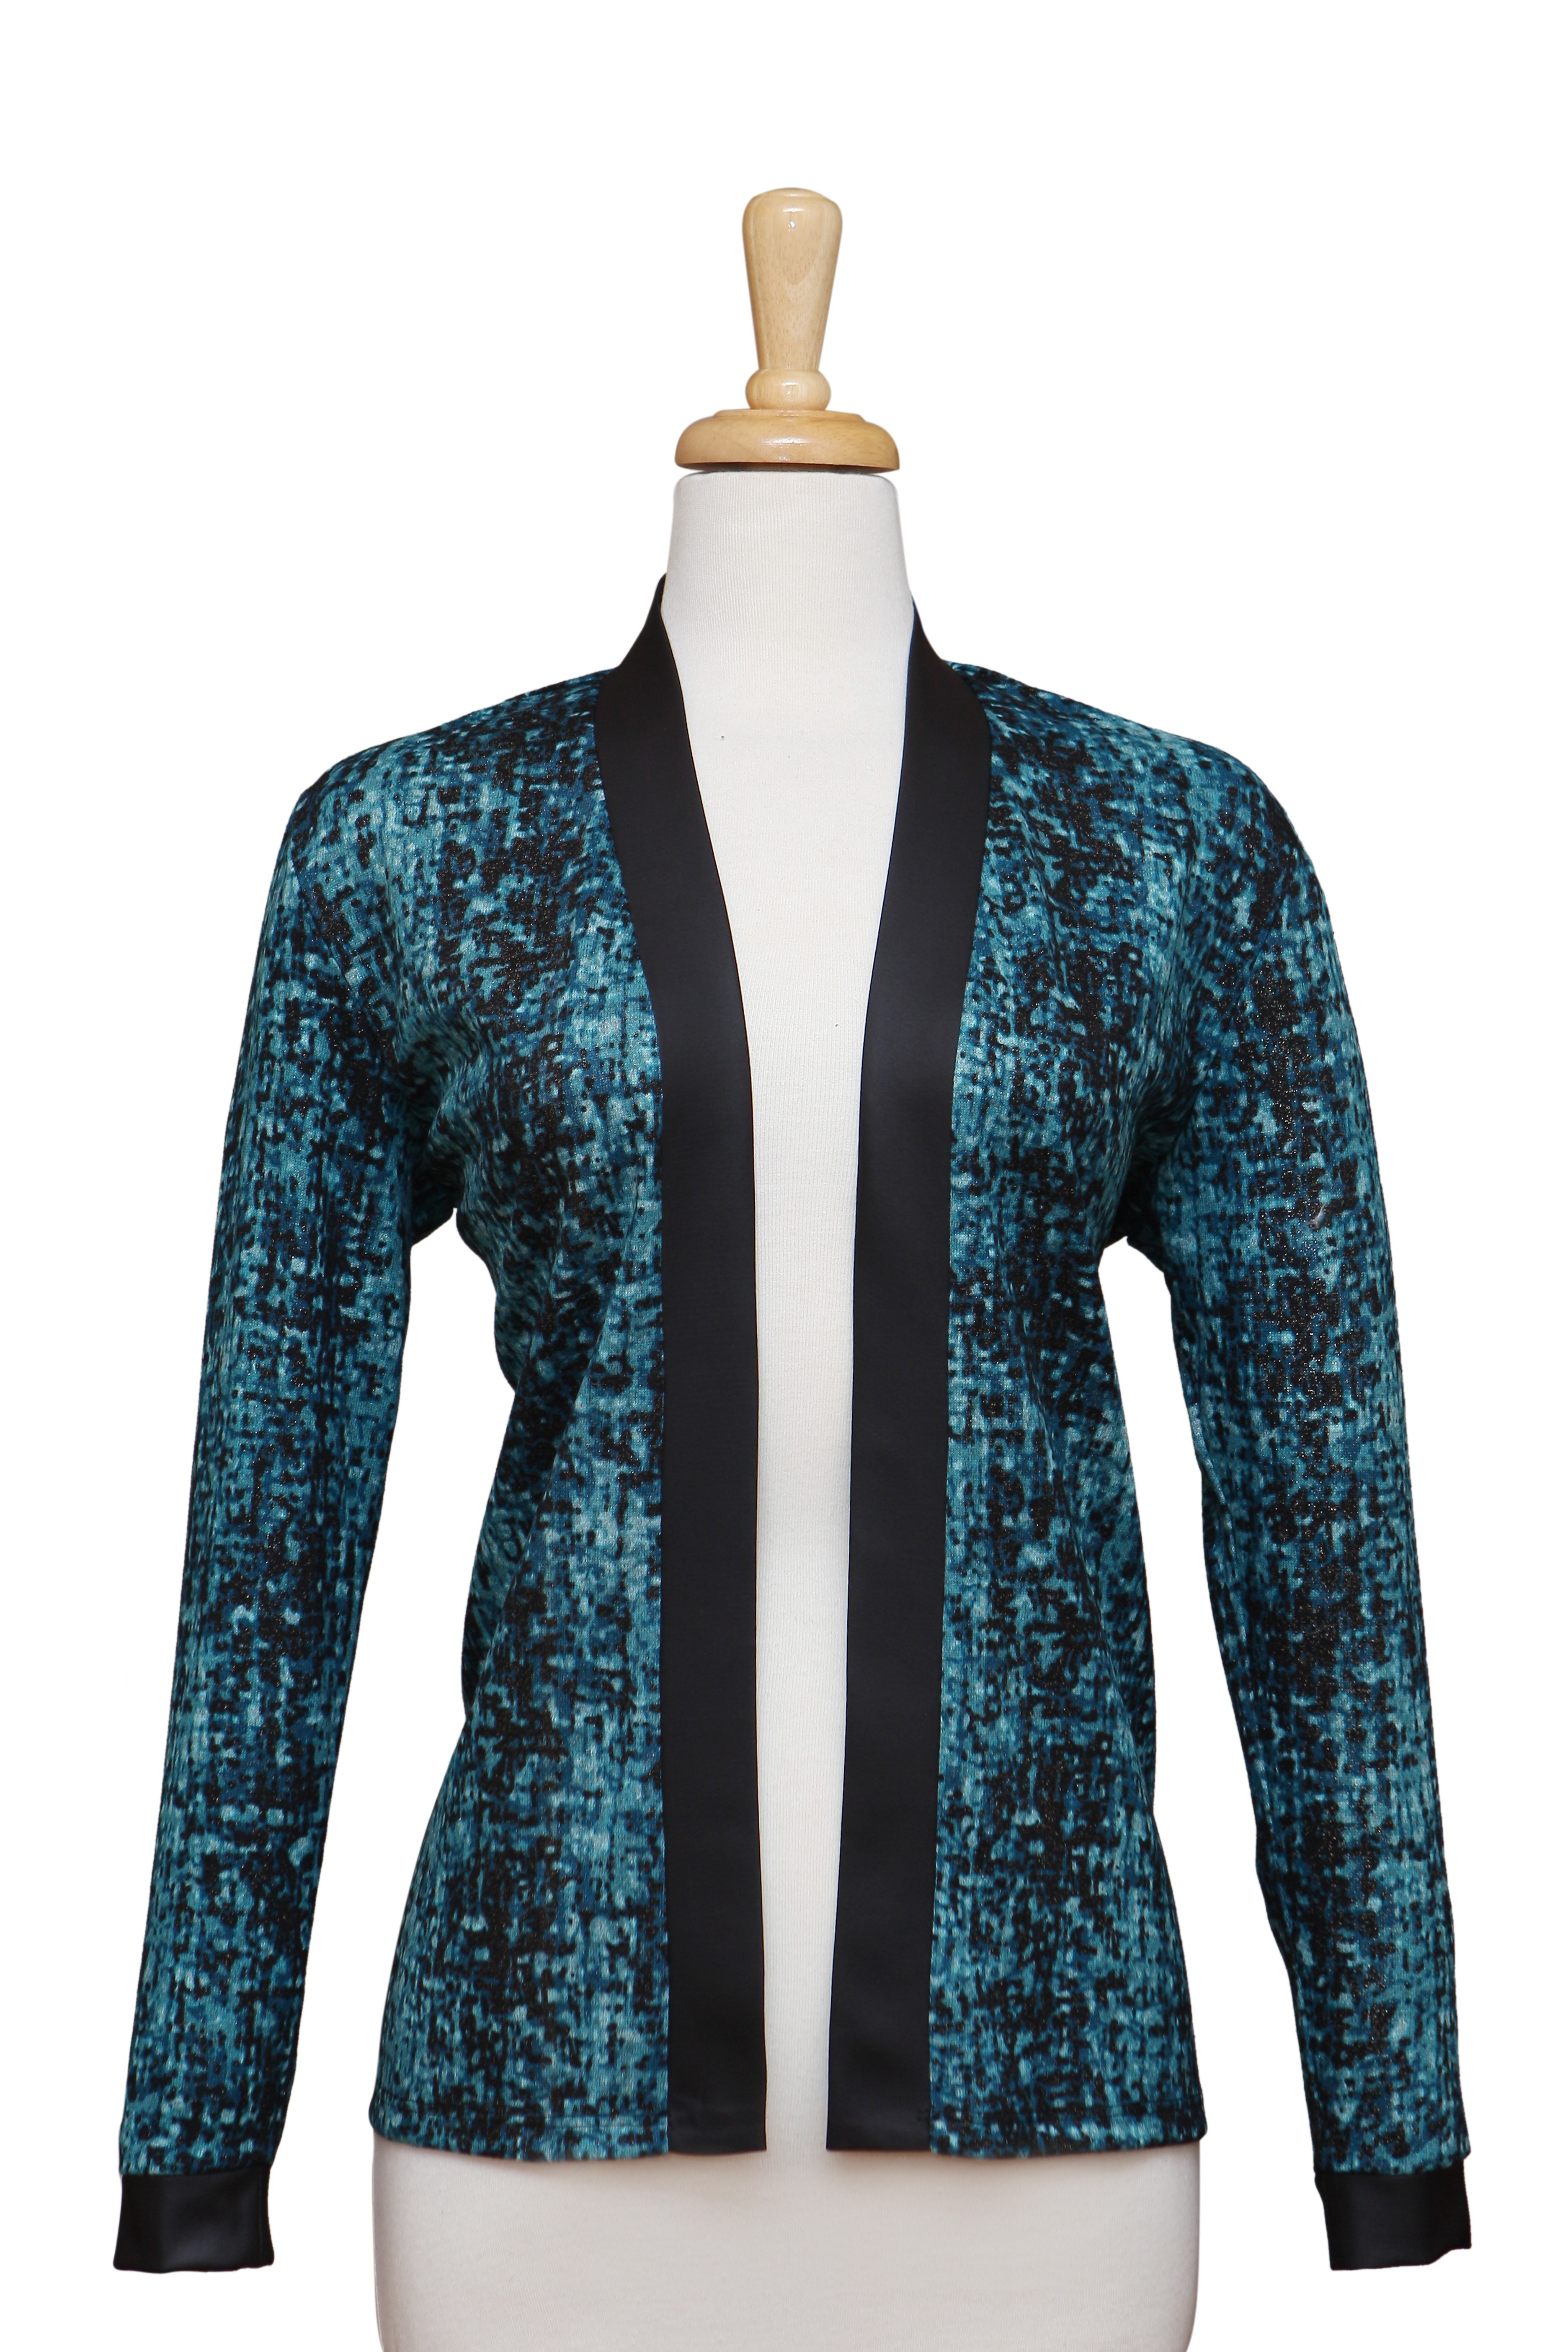 Teal & Black Knit Jacket with Leather Trim